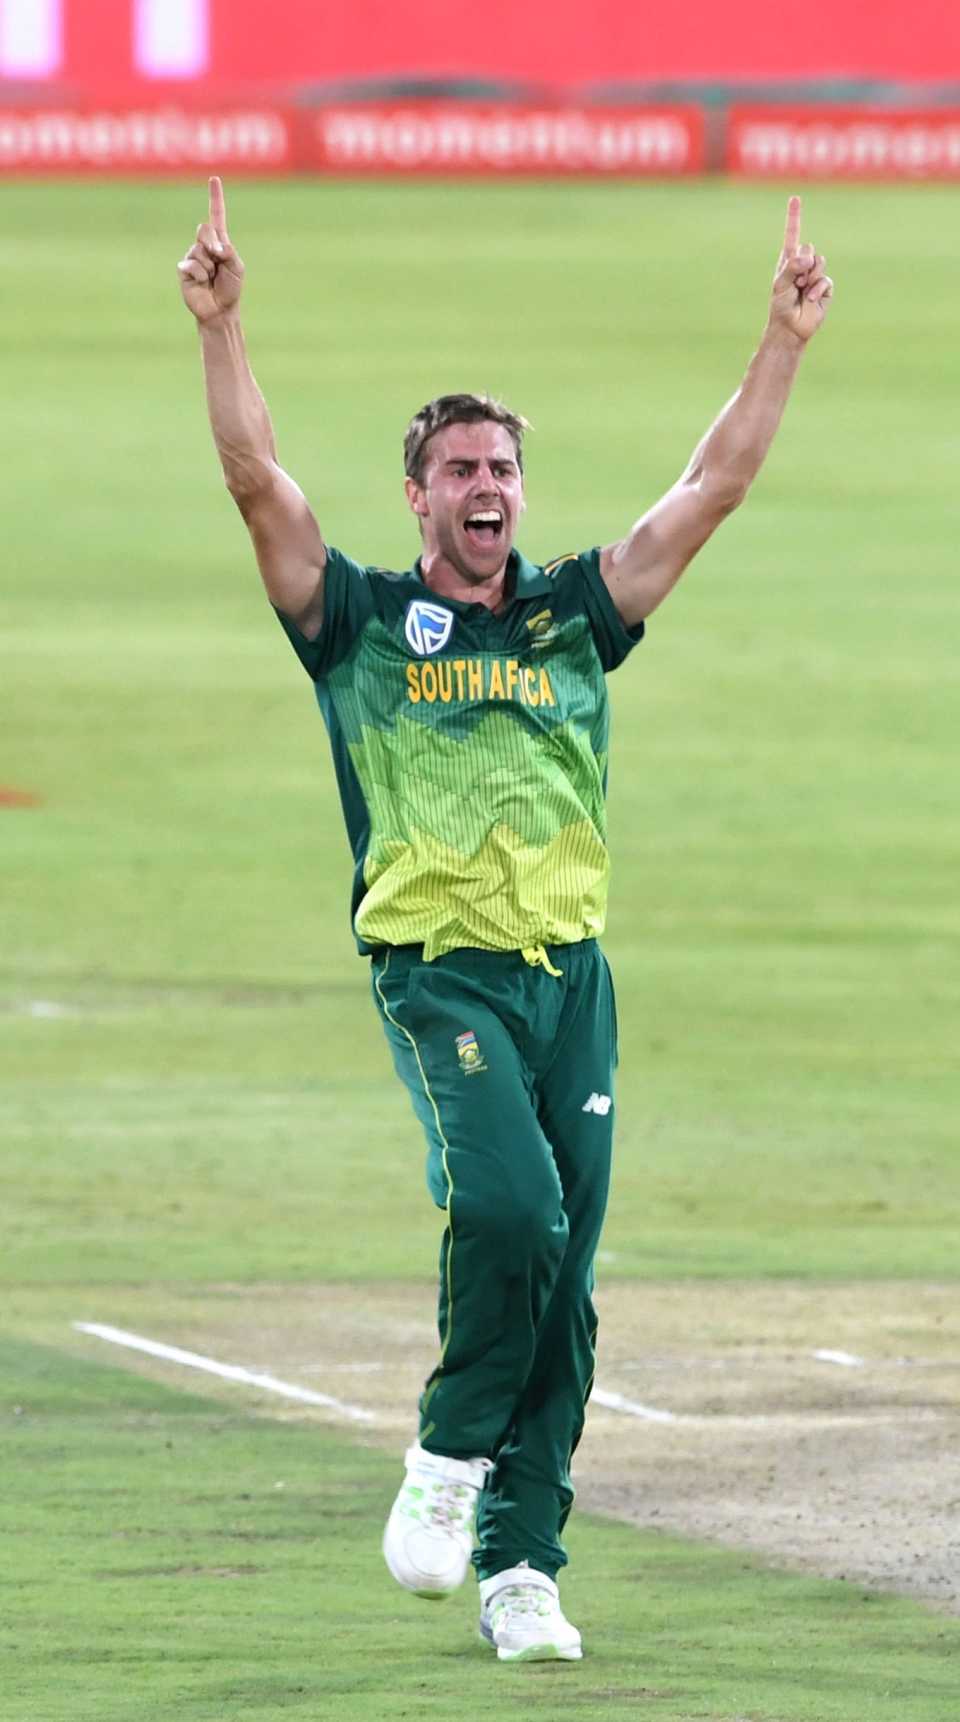 Anrich Nortje has shown that he is a wicket-taking option even when conditions don't suit him, South Africa v Sri Lanka, 2nd ODI, Centurion, March 6, 2019